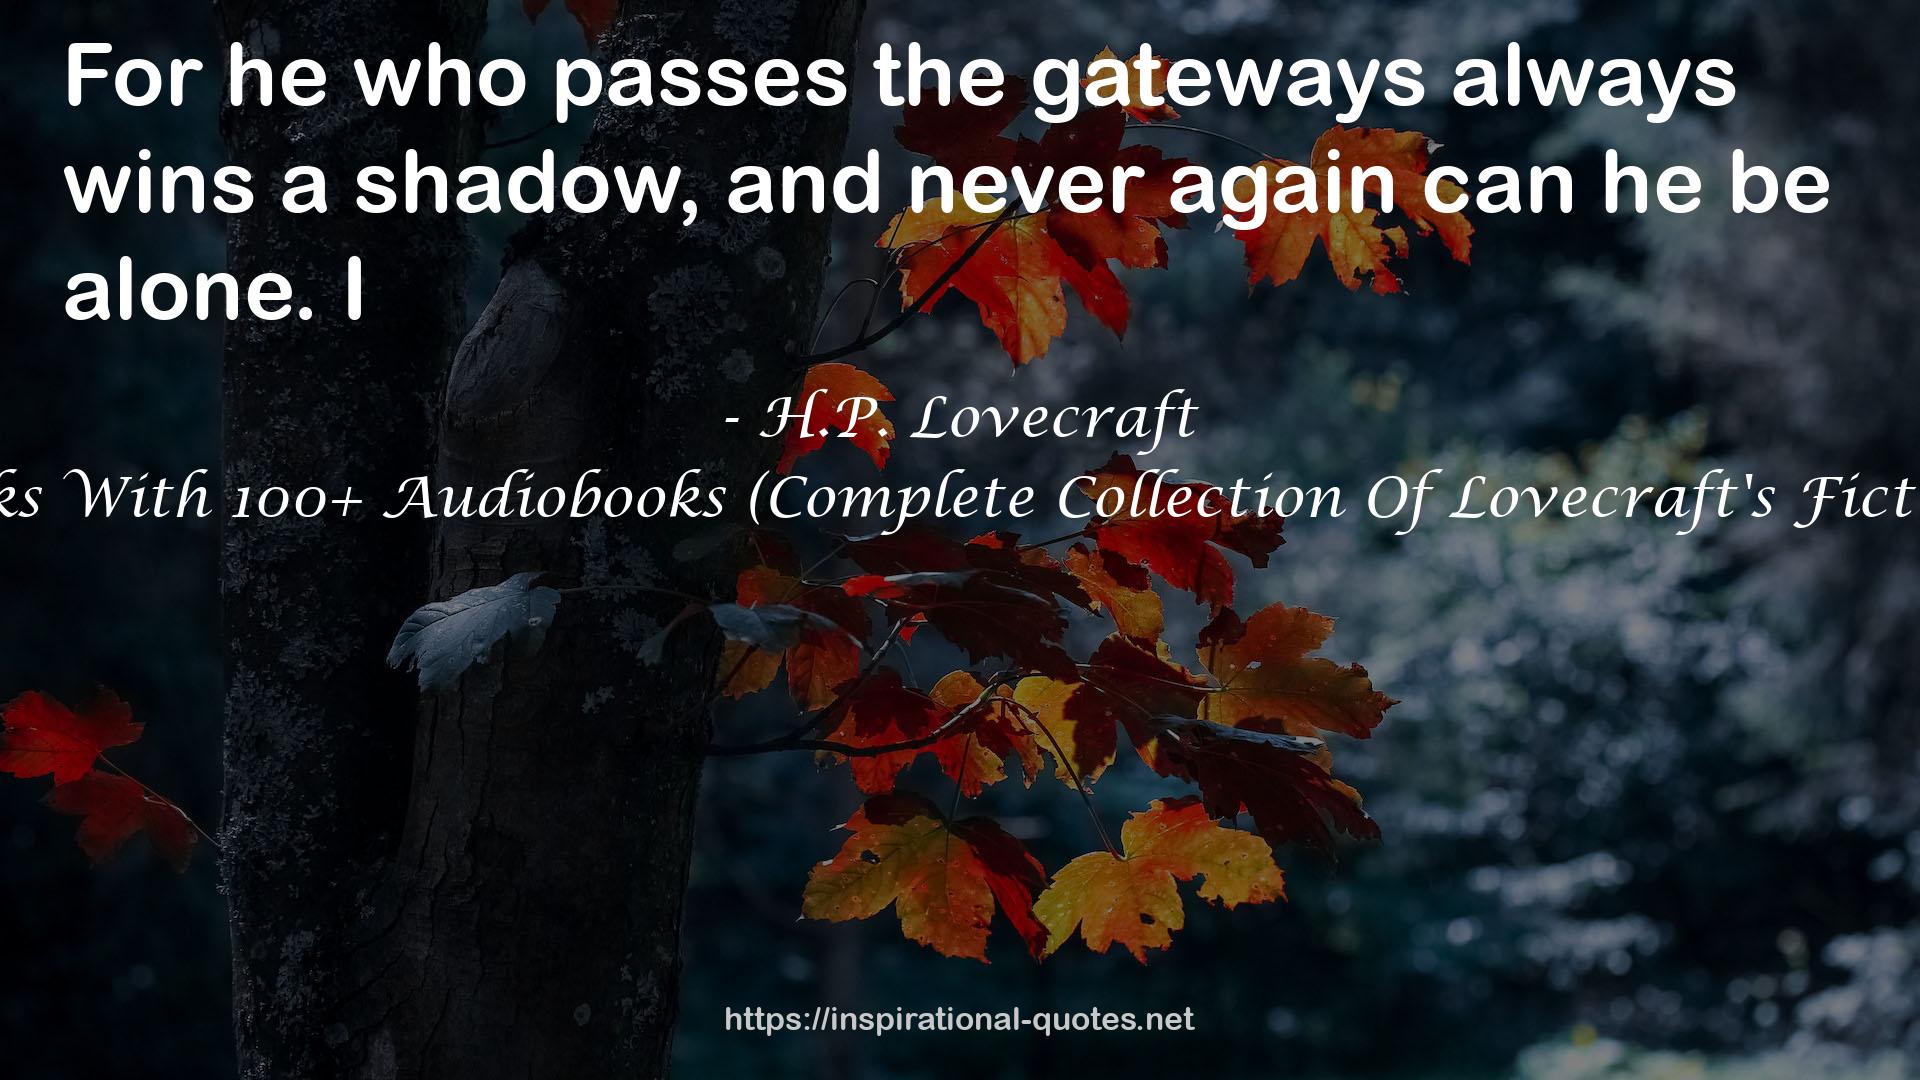 Complete Collection Of H. P. Lovecraft - 150 eBooks With 100+ Audiobooks (Complete Collection Of Lovecraft's Fiction, Juvenilia, Poems, Essays And Collaborations) QUOTES